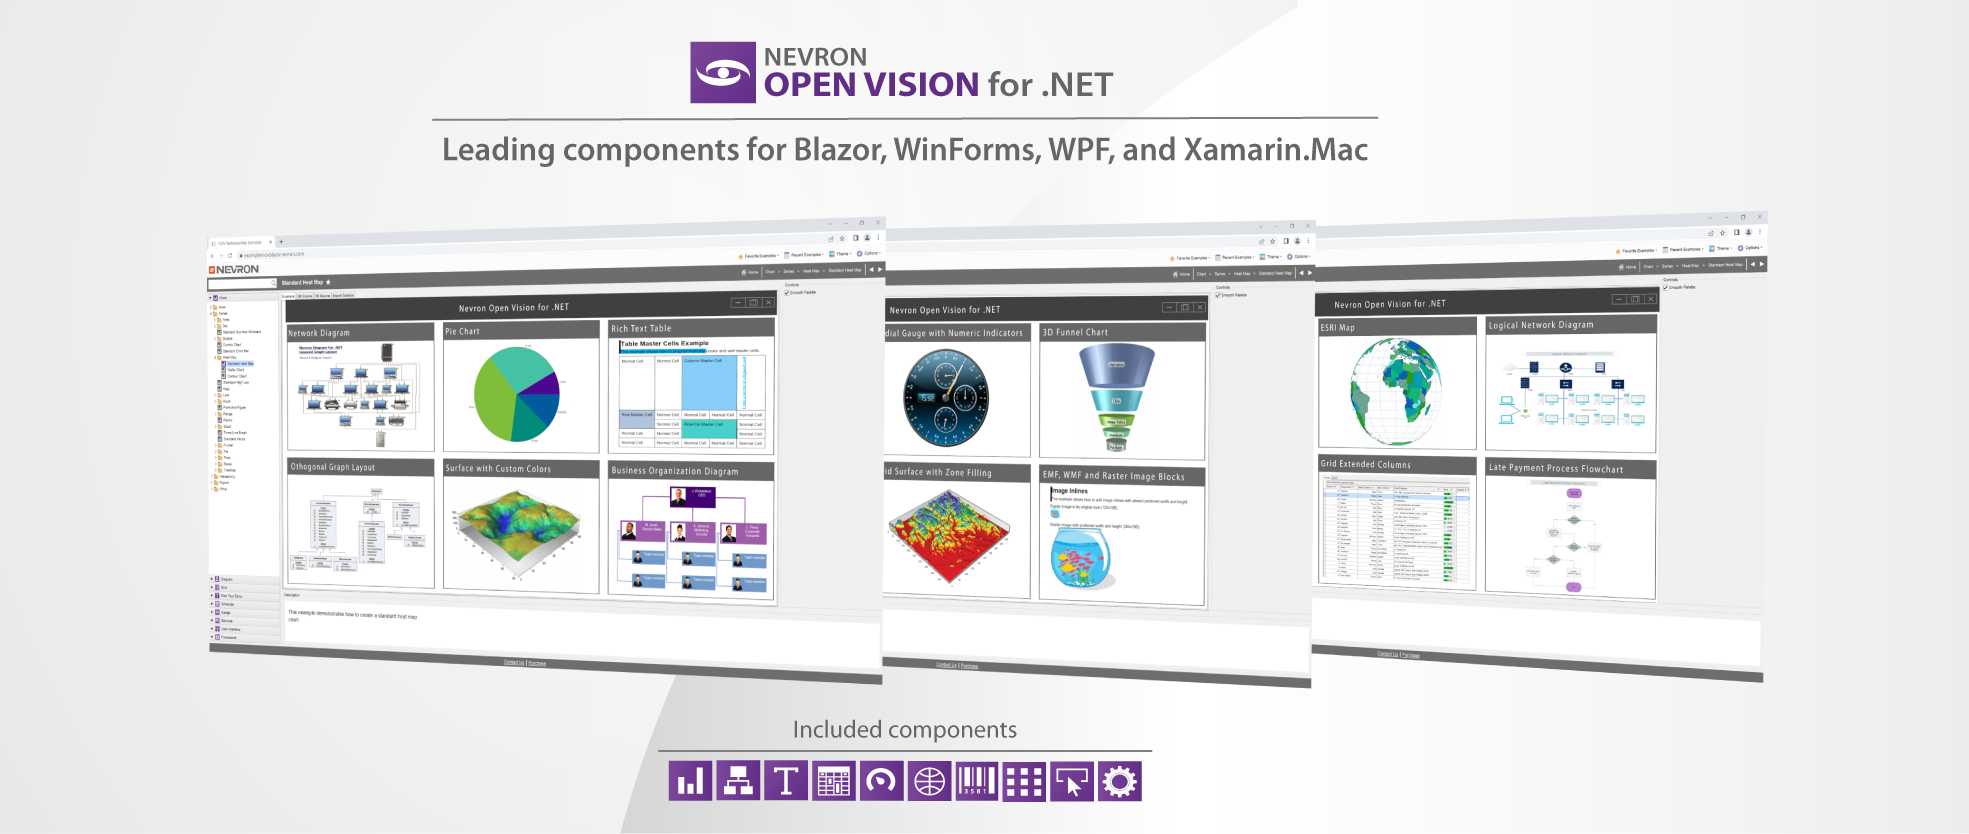 Nevron Open Vision for .NET v2022.3 is Now Available